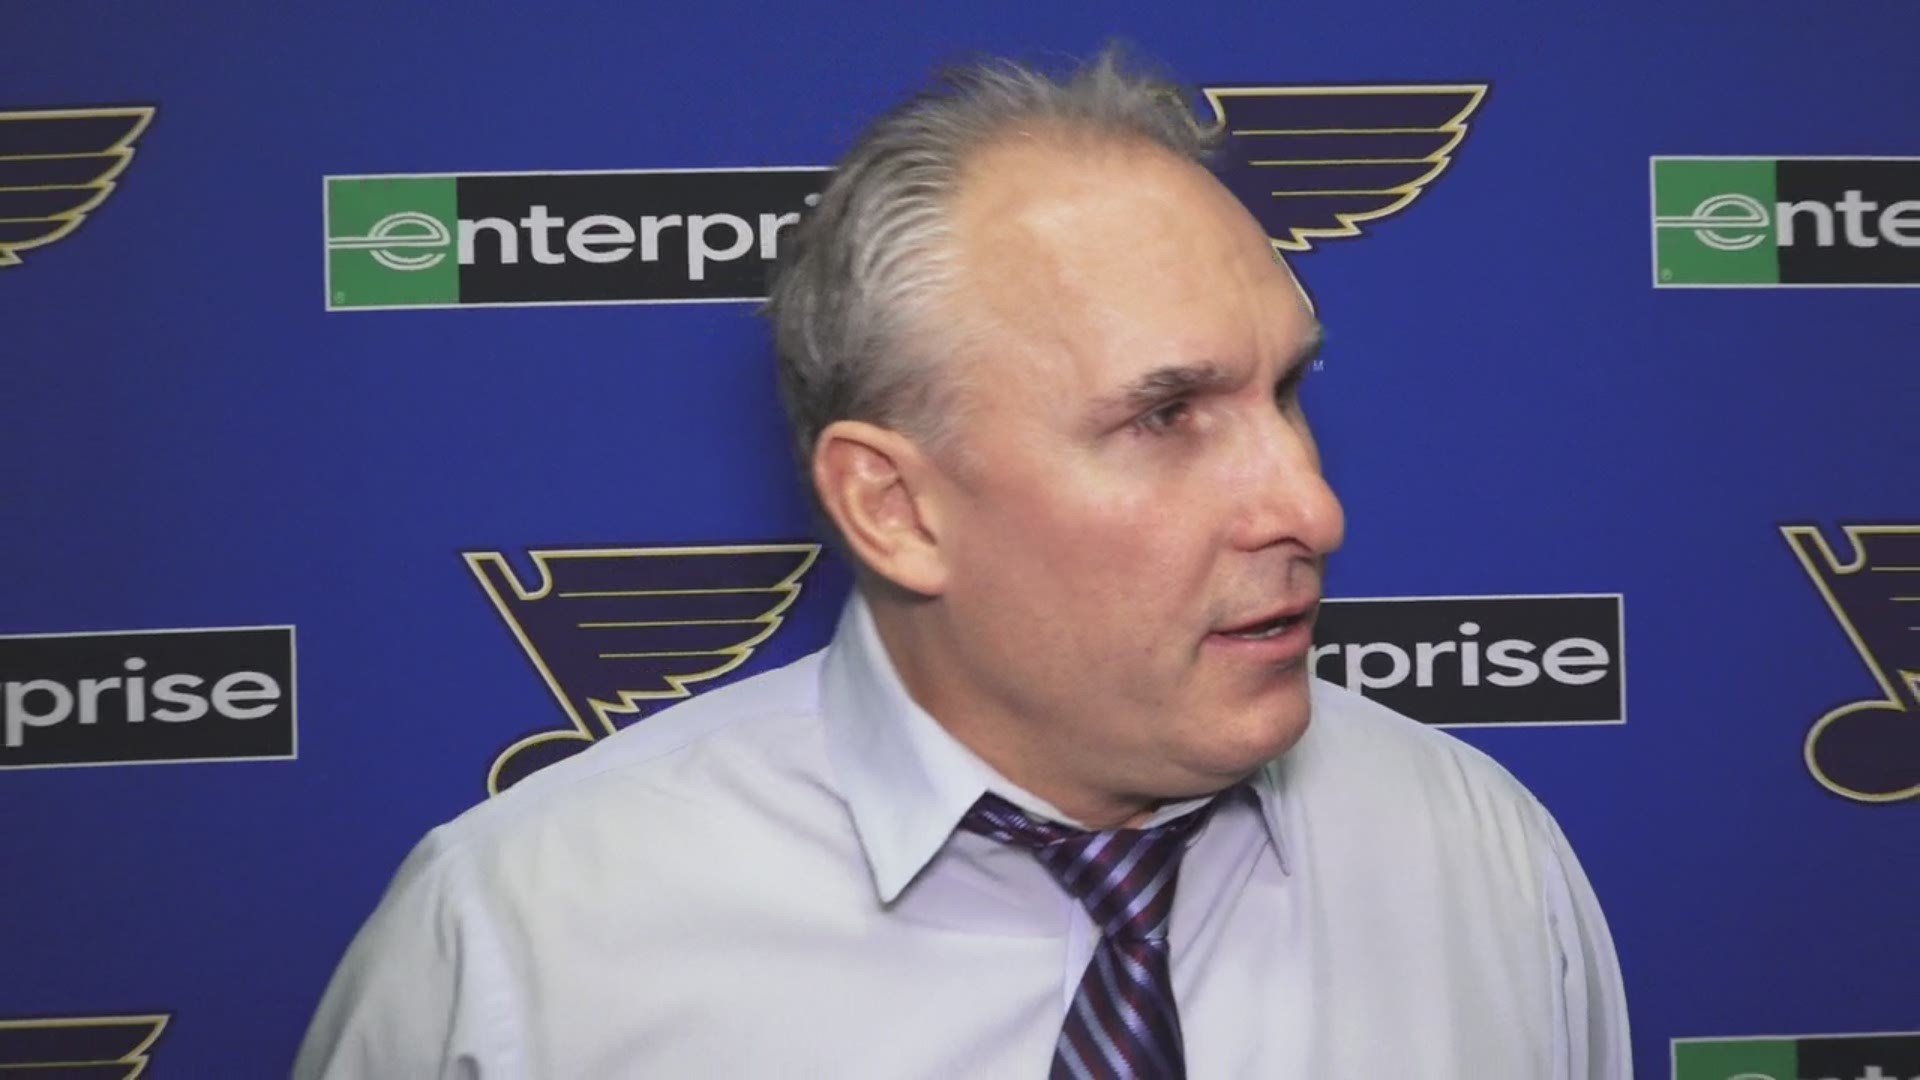 St. Louis looks to be back on track and hitting another stride as the trade deadline comes and goes. Video courtesy of Blue Note Productions.